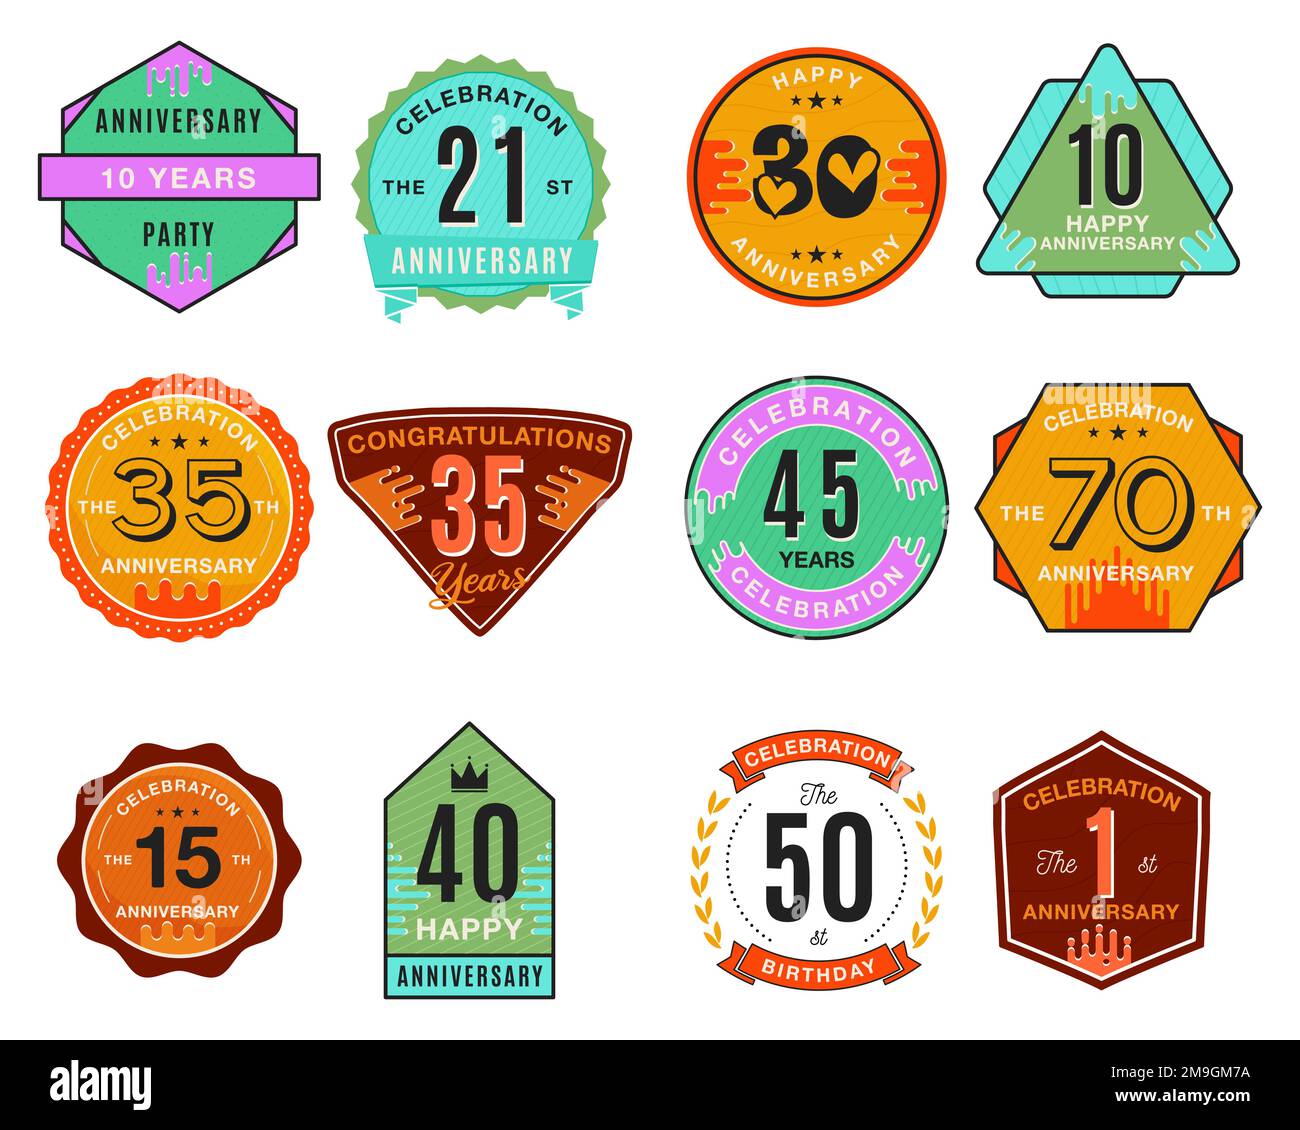 12 Anniversary Logo Templates Set. Wedding badges in flat modern style. Birthday anniversary labels collection. Stock vector designs Stock Vector